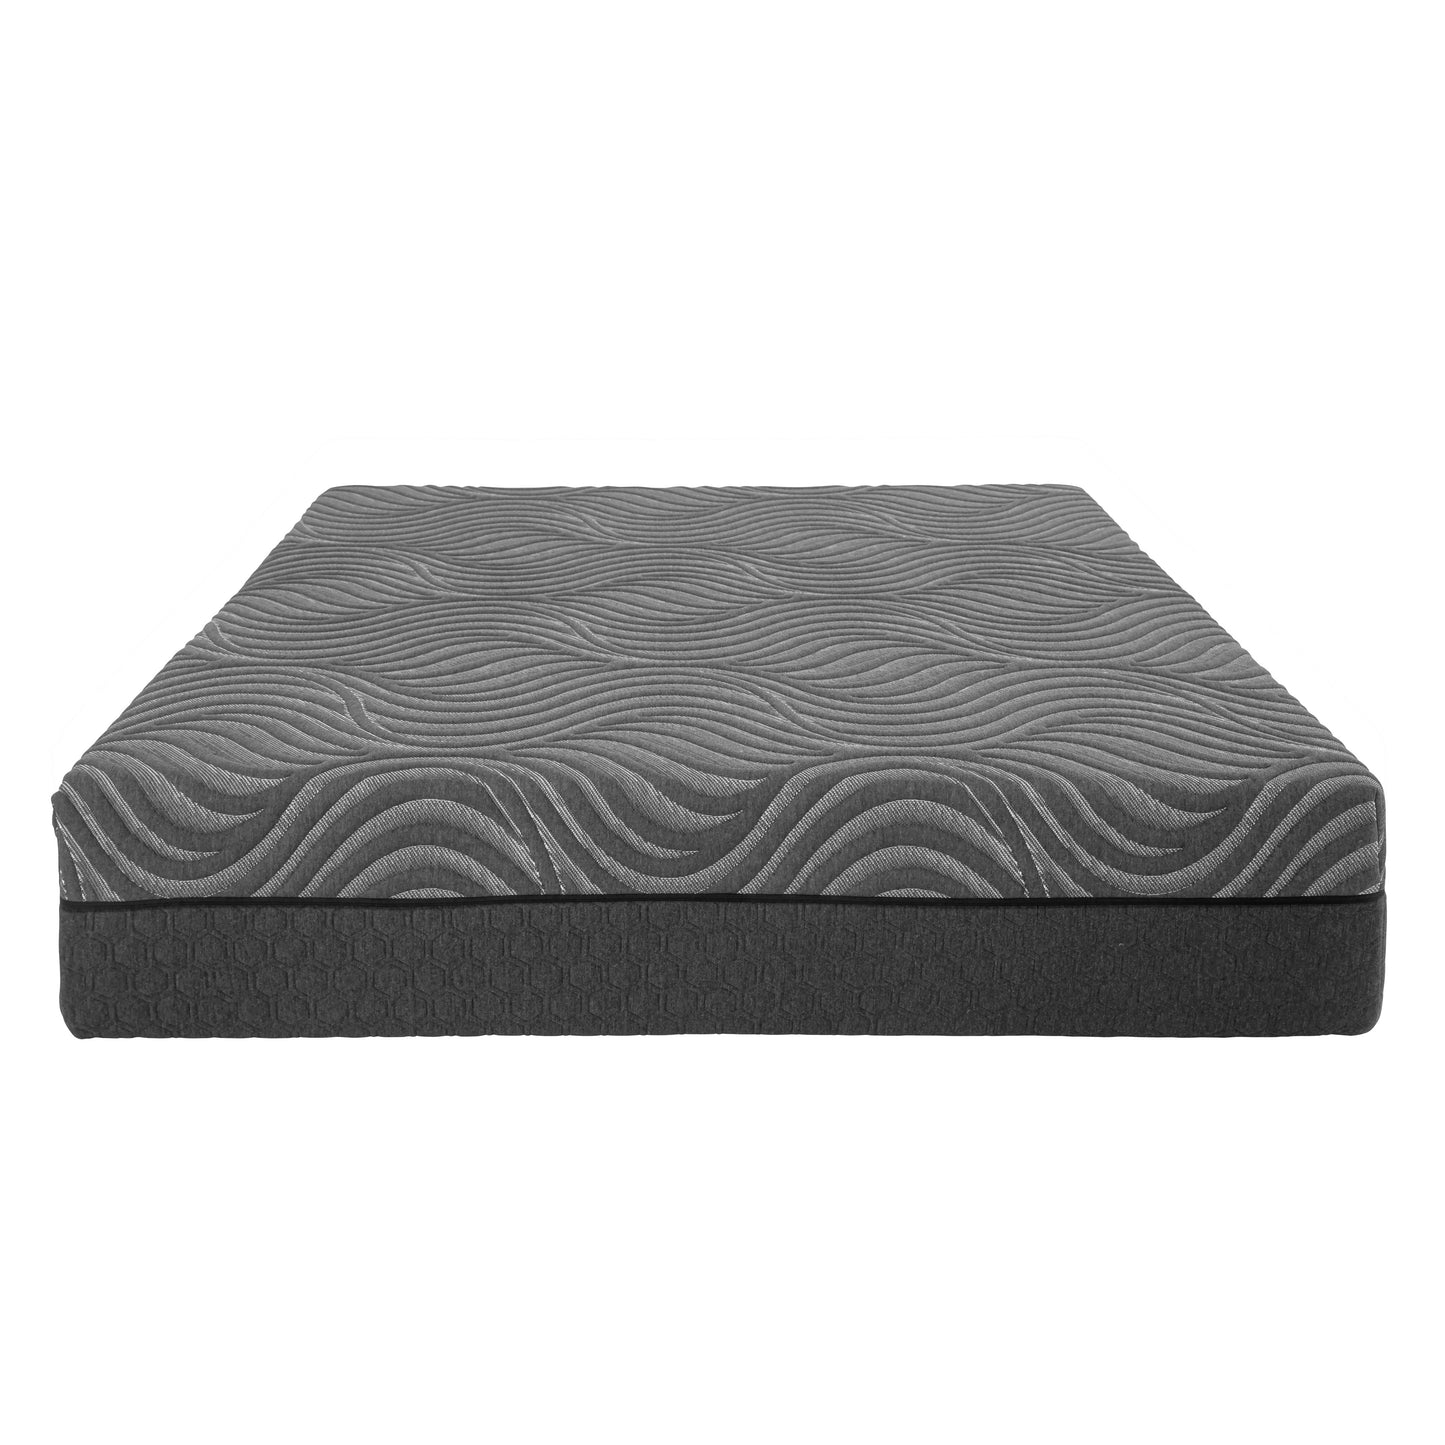 QUEEN 11'' Copper-Infused Memory Foam Hybrid-Taurus Collection